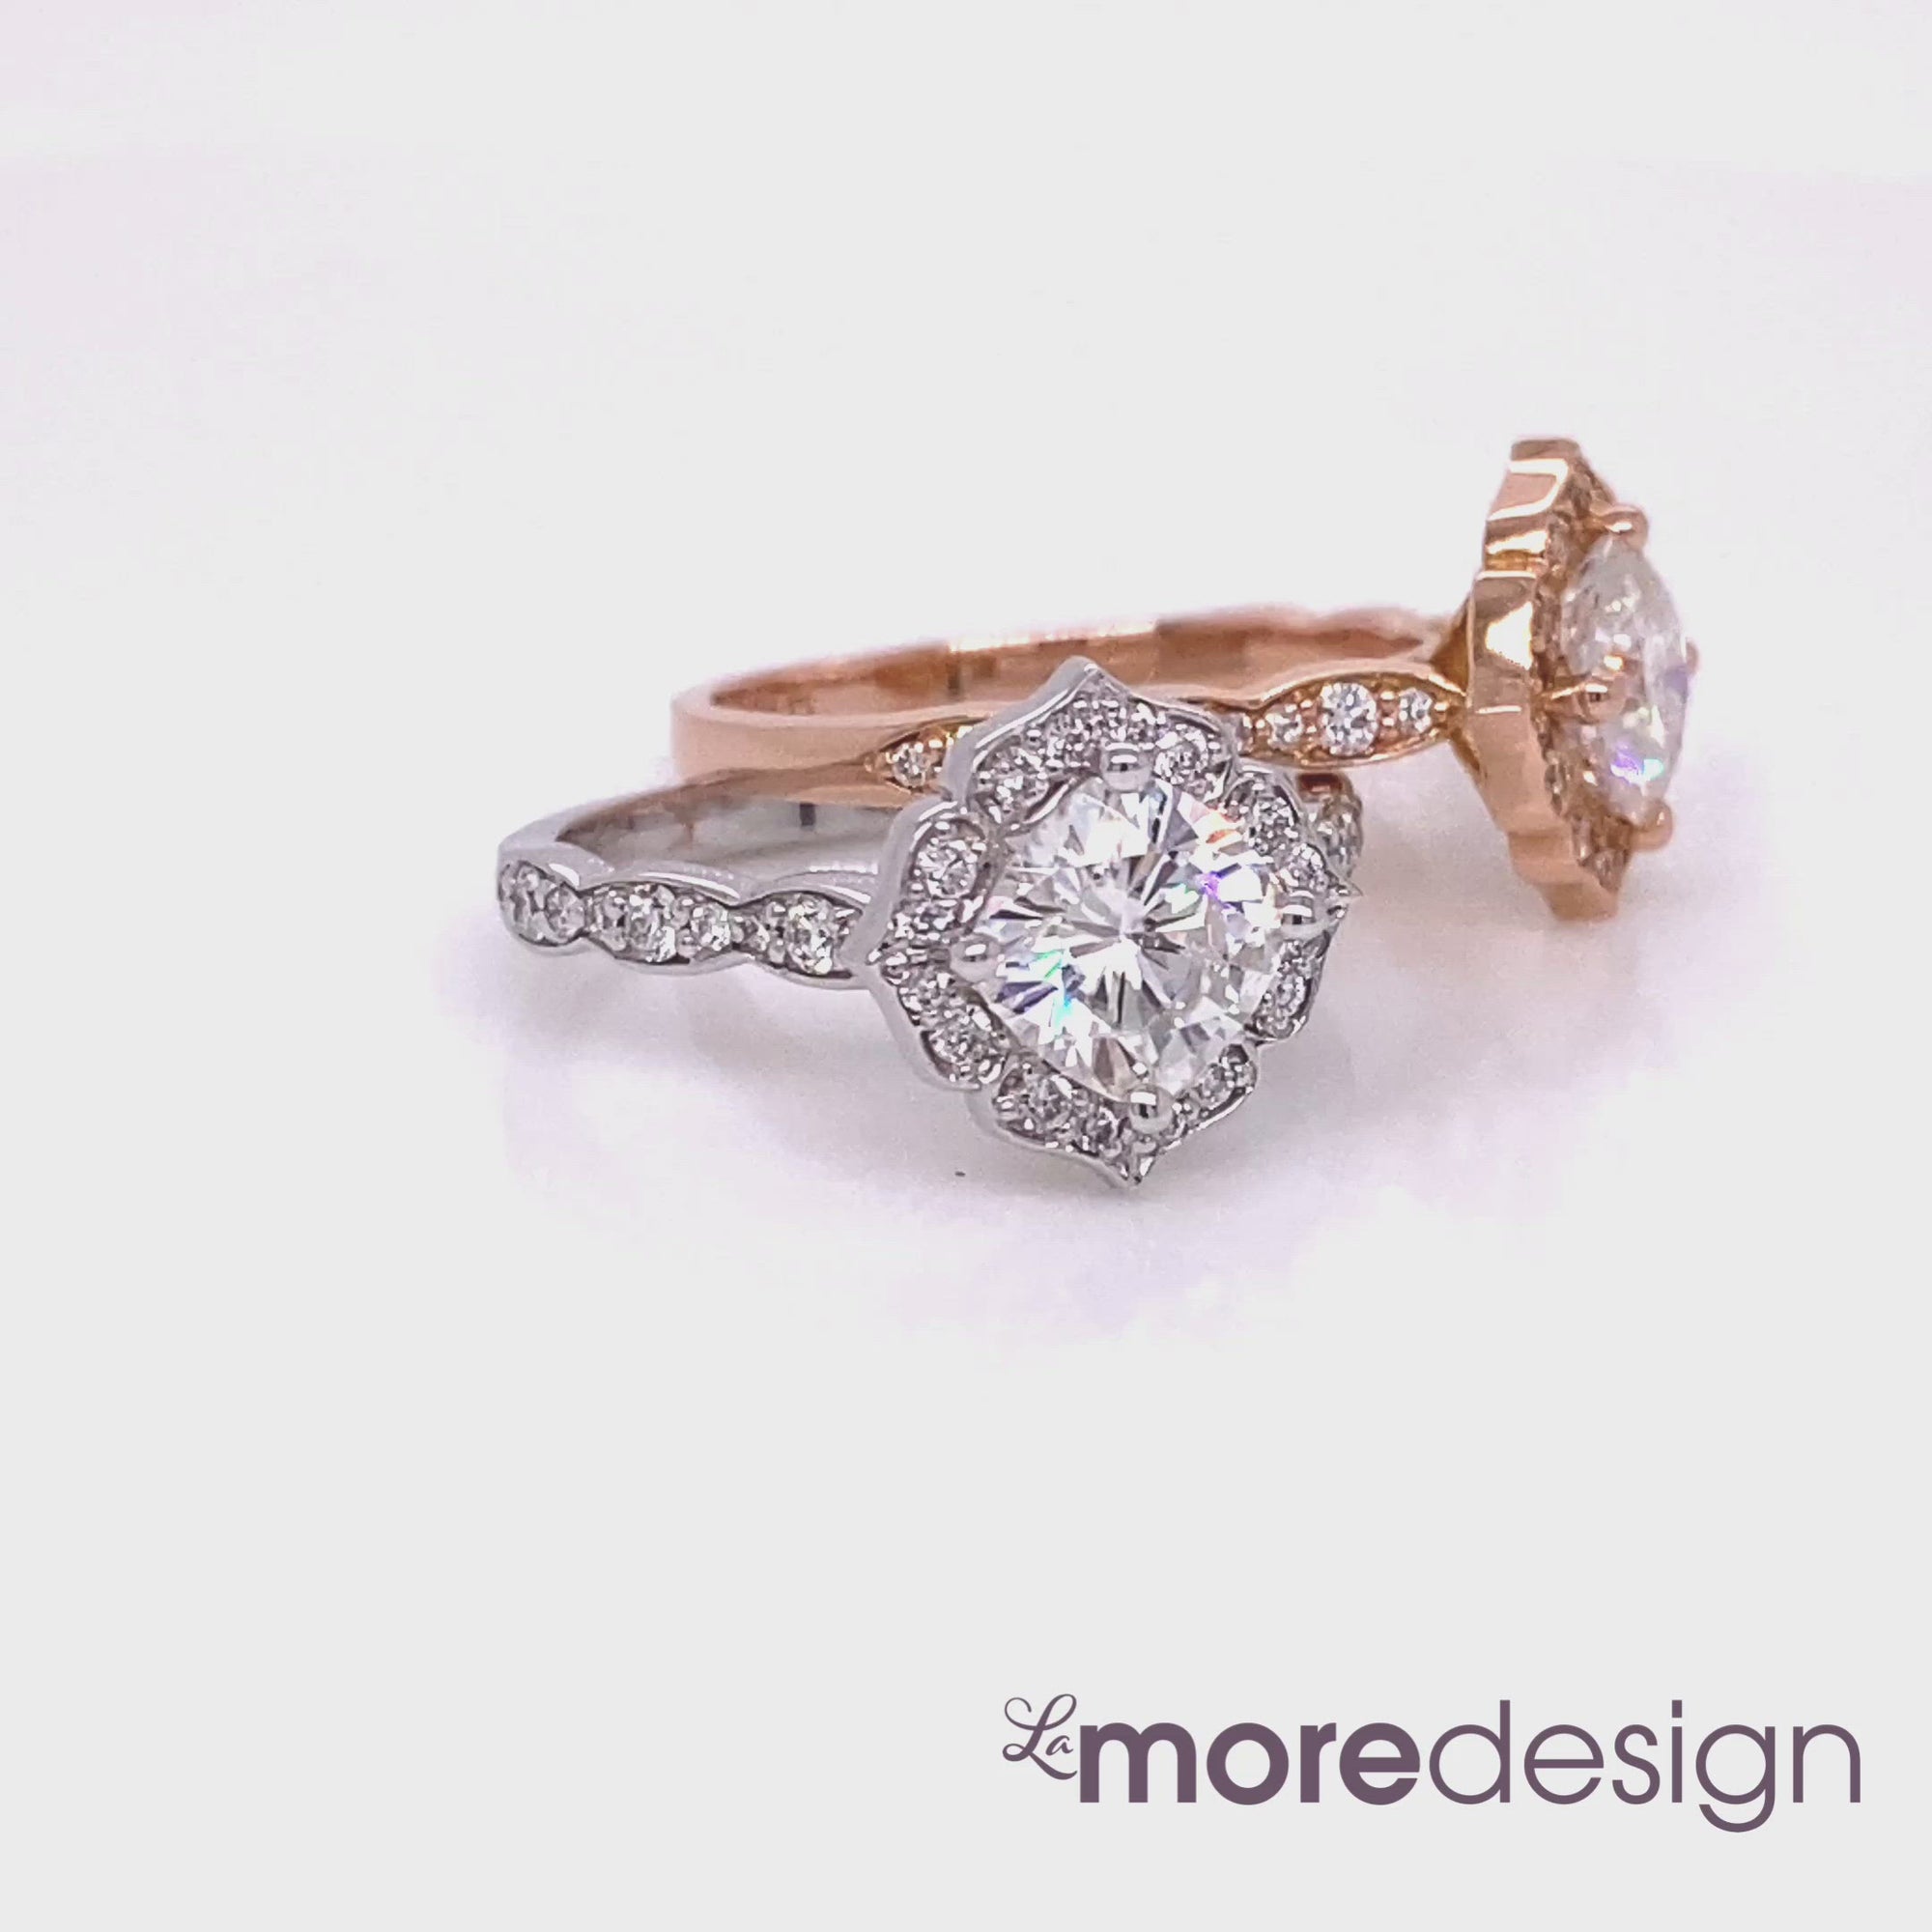 vintage floral moissanite engagement ring white gold and rose gold scalloped diamond band by la more design jewelry